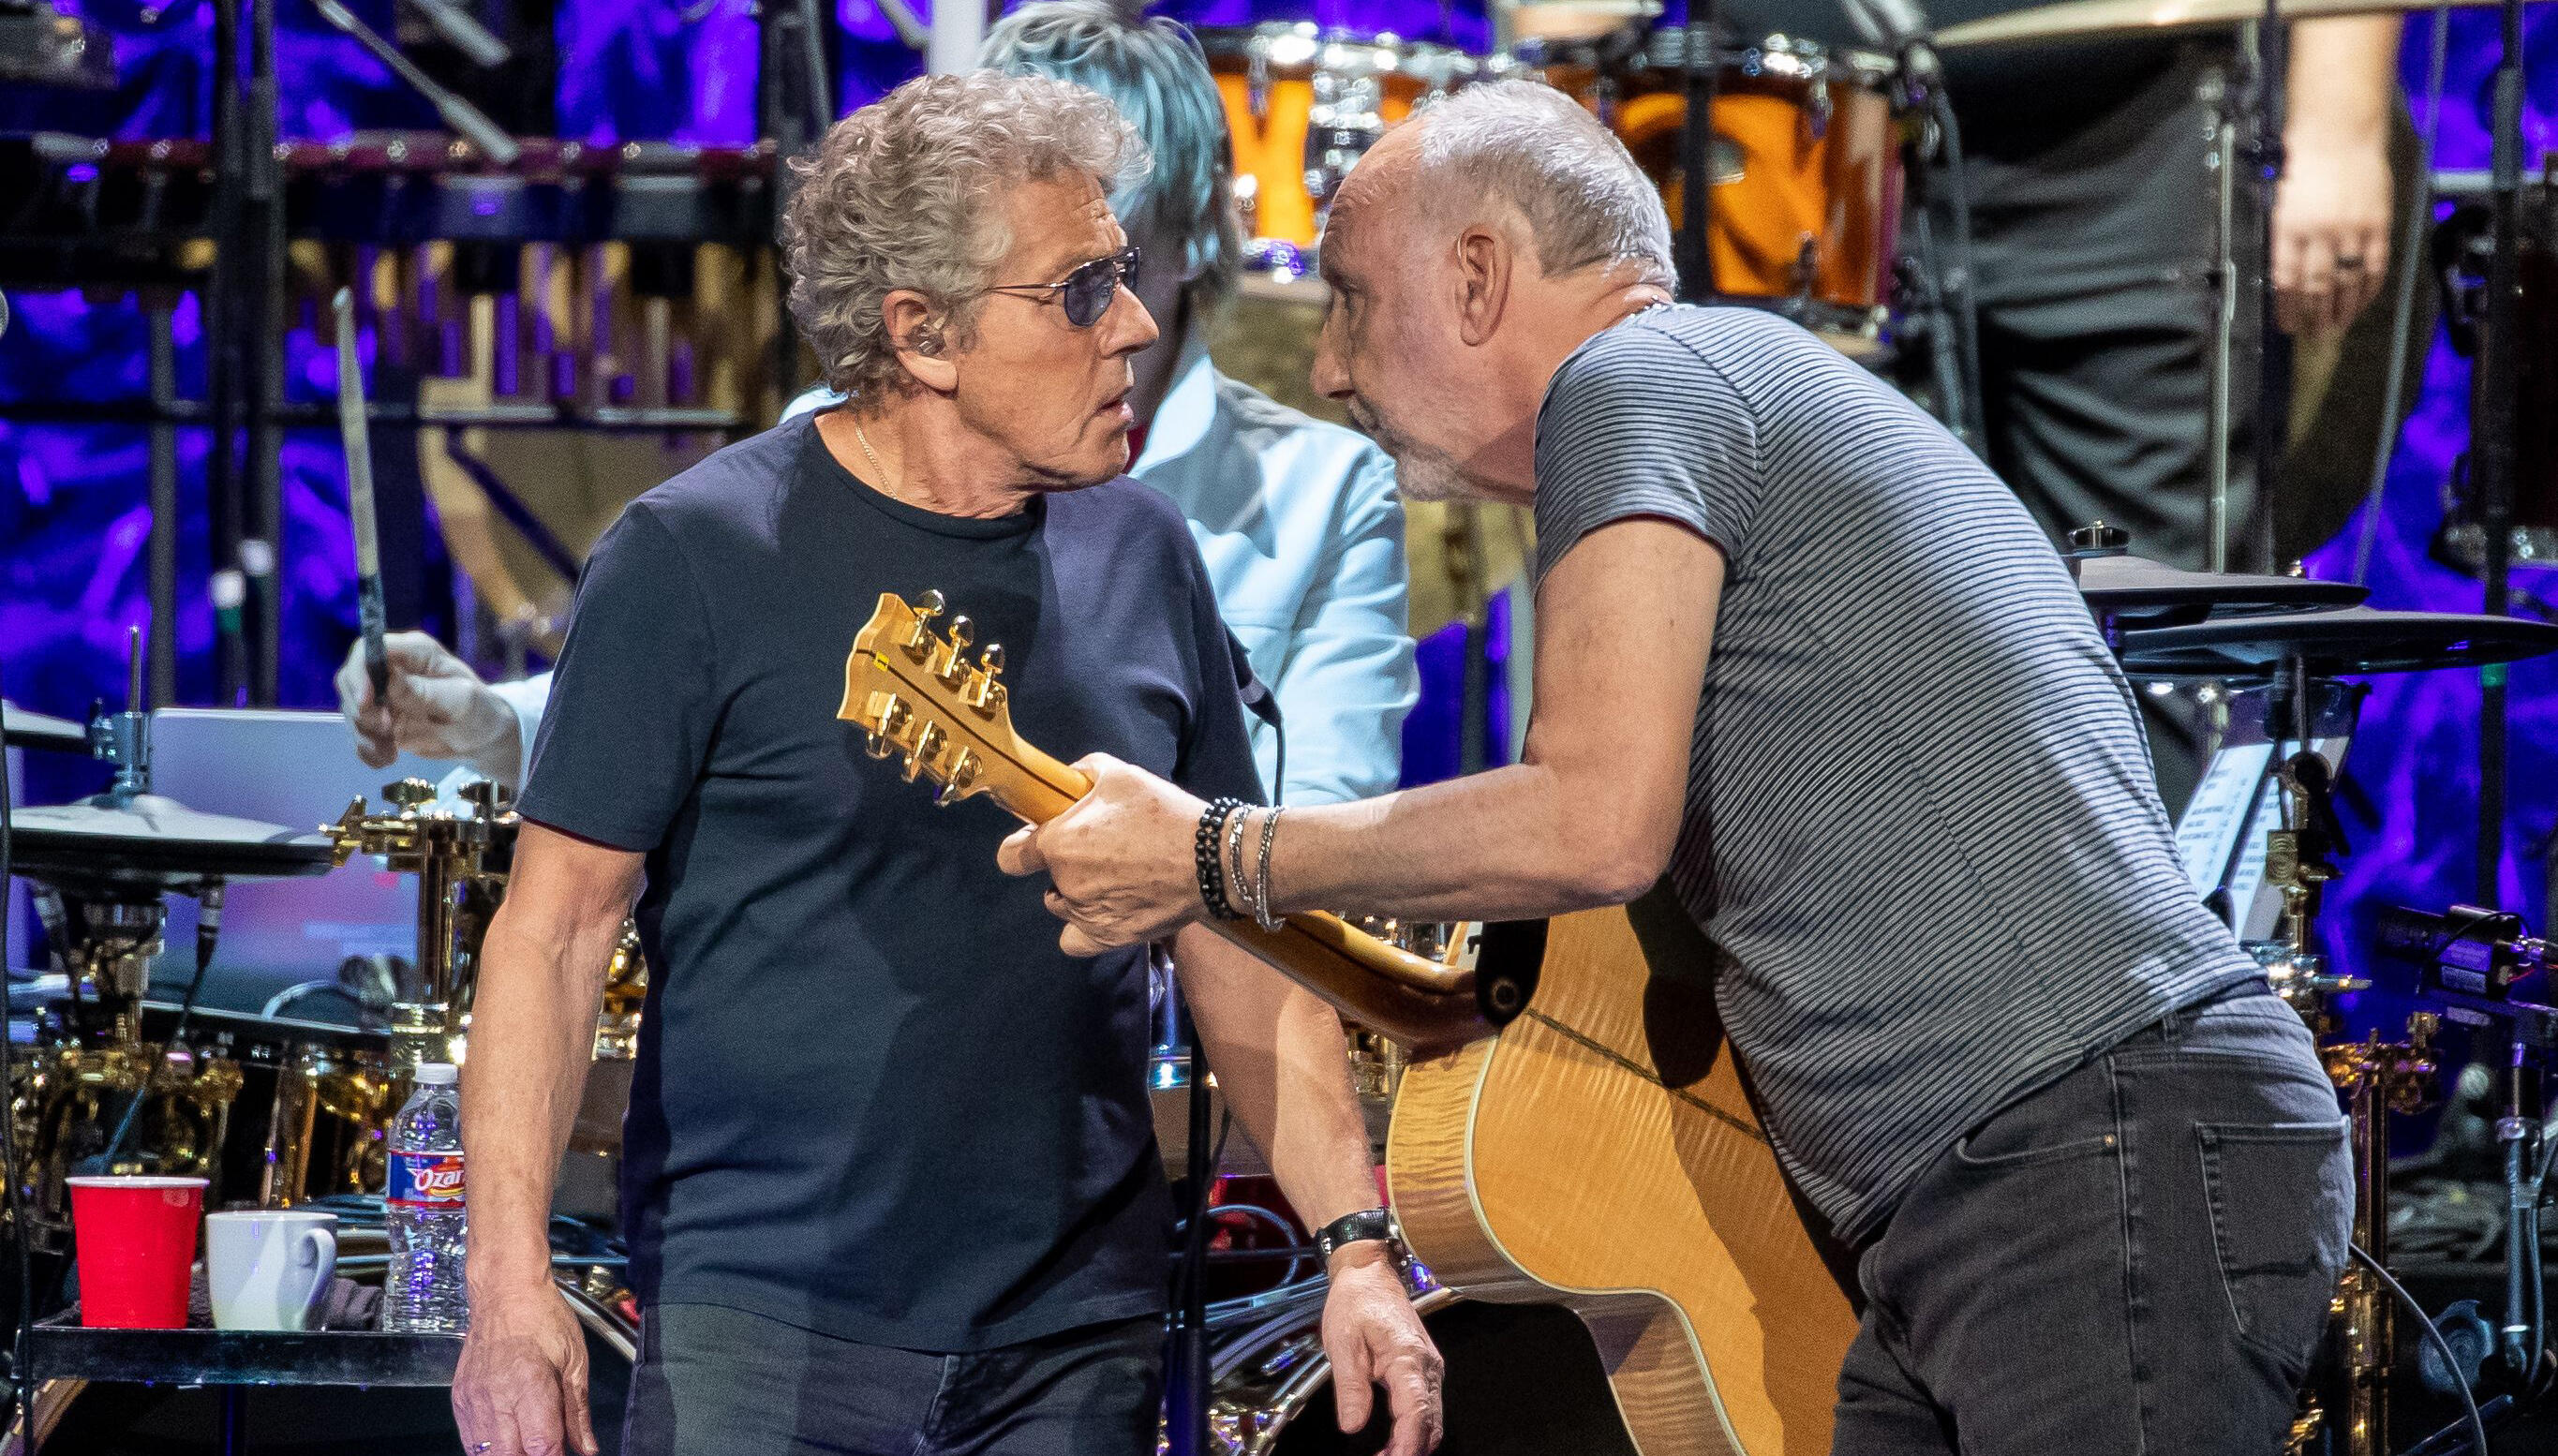 The Who's Roger Daltrey: 'With the world in the state it is in, we